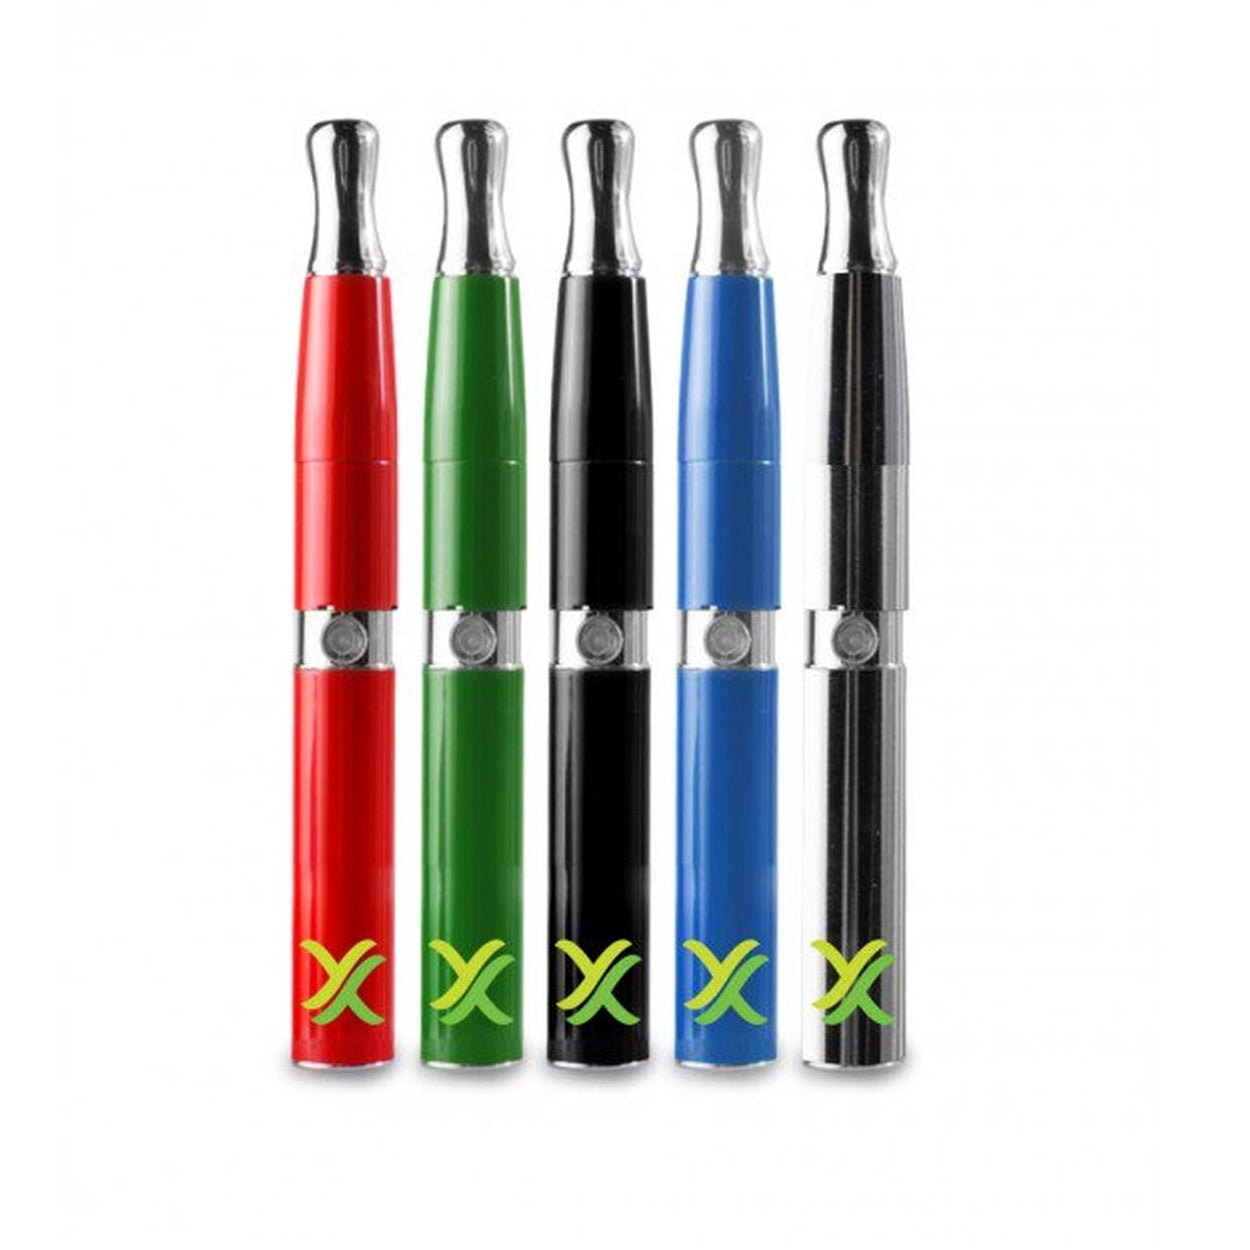 Exxus Max Concentrate Vaporizer (THIS ITEM IS FOR IN-STORE PICKUP ONLY)